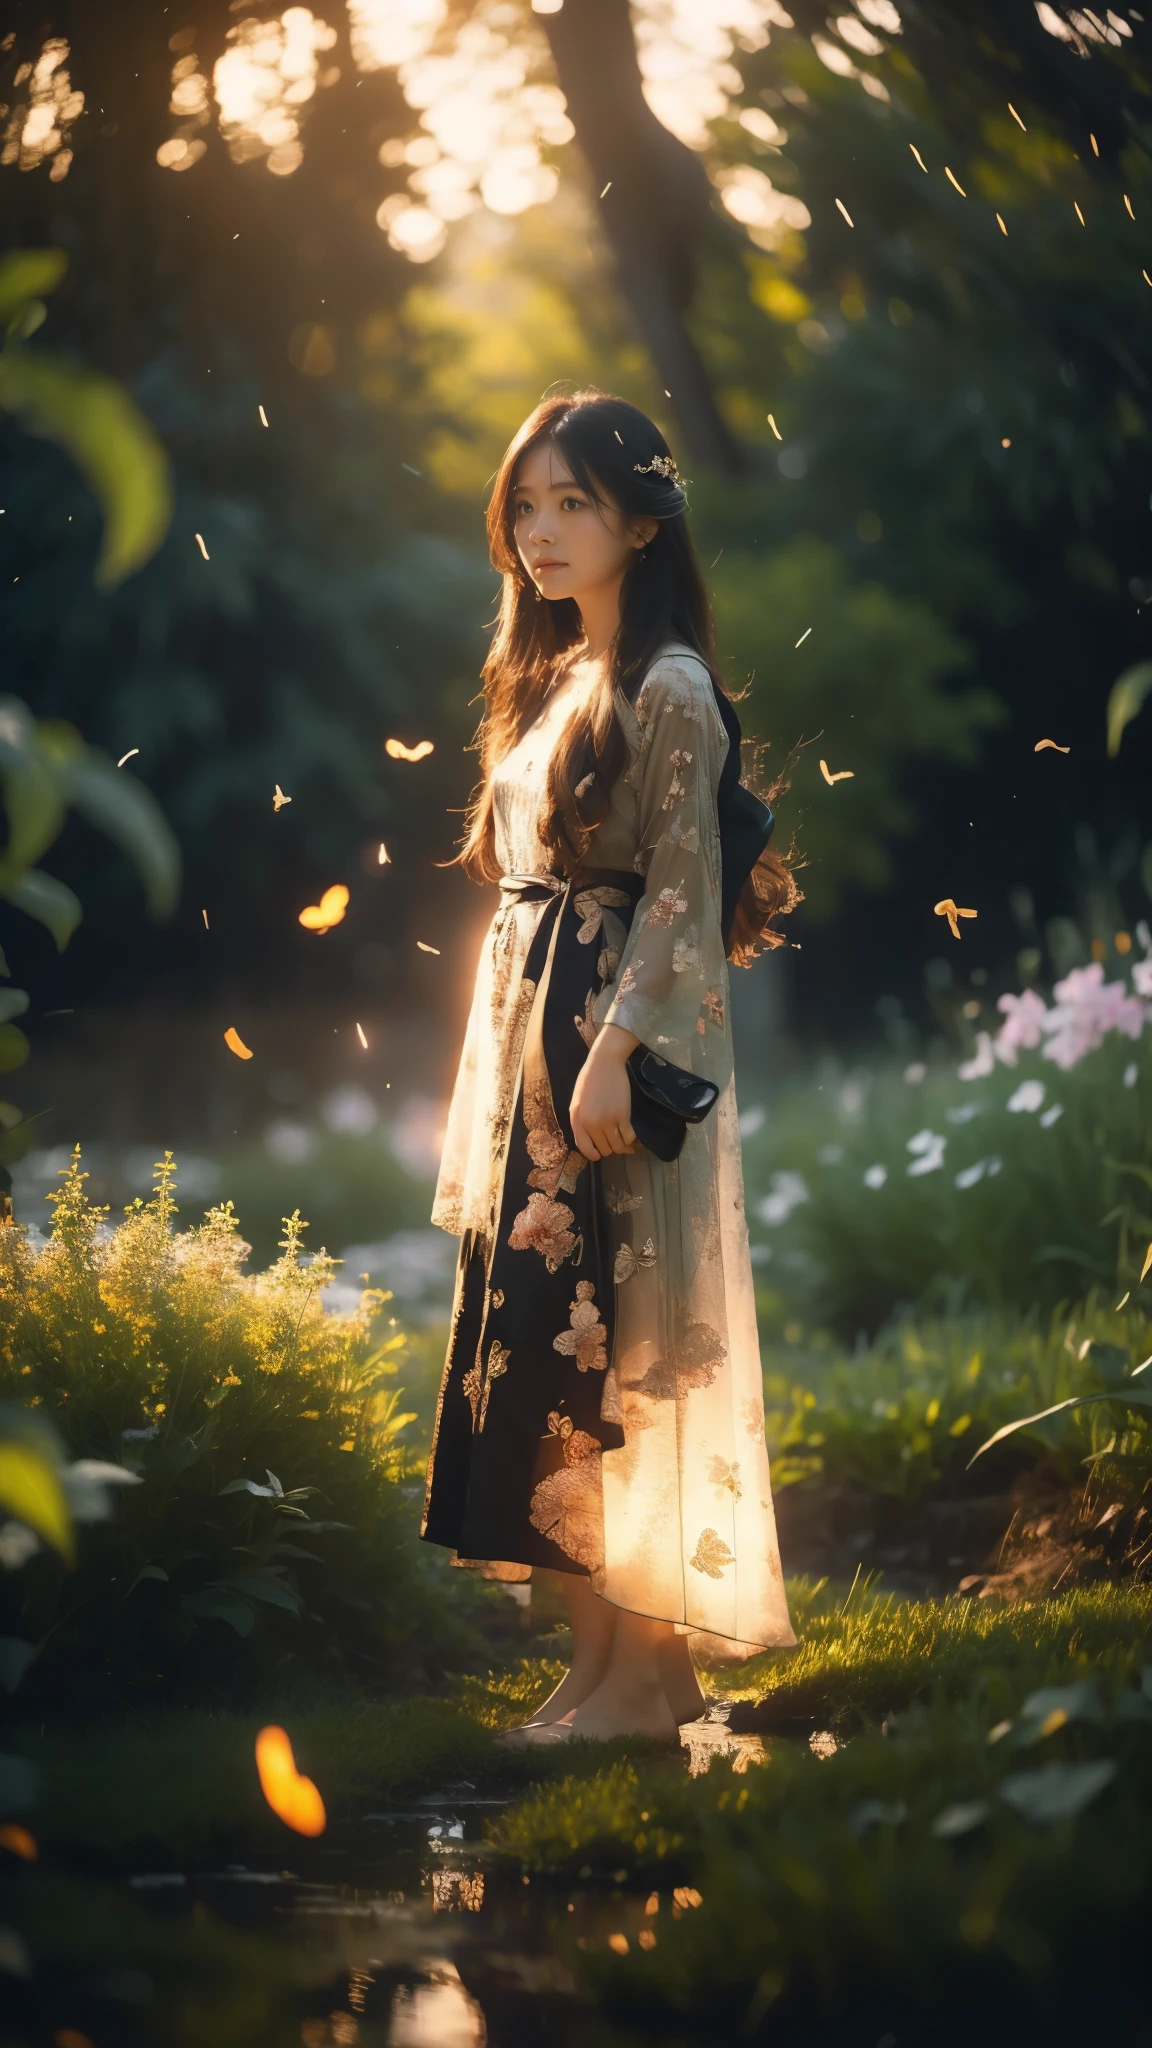 
Subject: Portrait of a young Japanese girl with long, flowing hair, standing in a field of glowing flowers.

Lighting:

Time of day: Early morning, just before sunrise.

Light source: Soft, natural light from the side, with rays filtering through the trees and casting long shadows.

Glowing elements:

Butterfly wings and bodies

Fireflies scattered throughout the field

A few falling leaves with a soft, glowing light

Kimi no Nawa-inspired meteor streaks across the sky

Girl's face has a subtle, natural oil sheen reflecting the light

Background:

Landscape: Lush, green field filled with vibrant, glowing flowers.

Depth of field: 90% blur, emphasizing the girl as the main focus.

Bokeh effect: Creates a dreamy, ethereal atmosphere.

Additional details:

Girl's attire: Long, flowing dress in a color that complements the landscape and glowing elements.

Hair: Realistic, flowing, and detailed, with a touch of fantastical flair.

Expression: Peaceful and serene, with a hint of wonder.

Overall style: Anime-inspired, but realistic in terms of lighting, skin texture, and hair.

Image resolution: 8K for high quality and detail.

Additional notes:

I've removed the macro shot and deep focus elements as they might conflict with the intended 8K resolution and landscape focus.

I've consolidated the "lots" of elements to maintain clarity and avoid information overload.

I've replaced "realistic concept, object, girl (girl walking a long masterpiece) (long object)" with a more concise and descriptive phrase.

